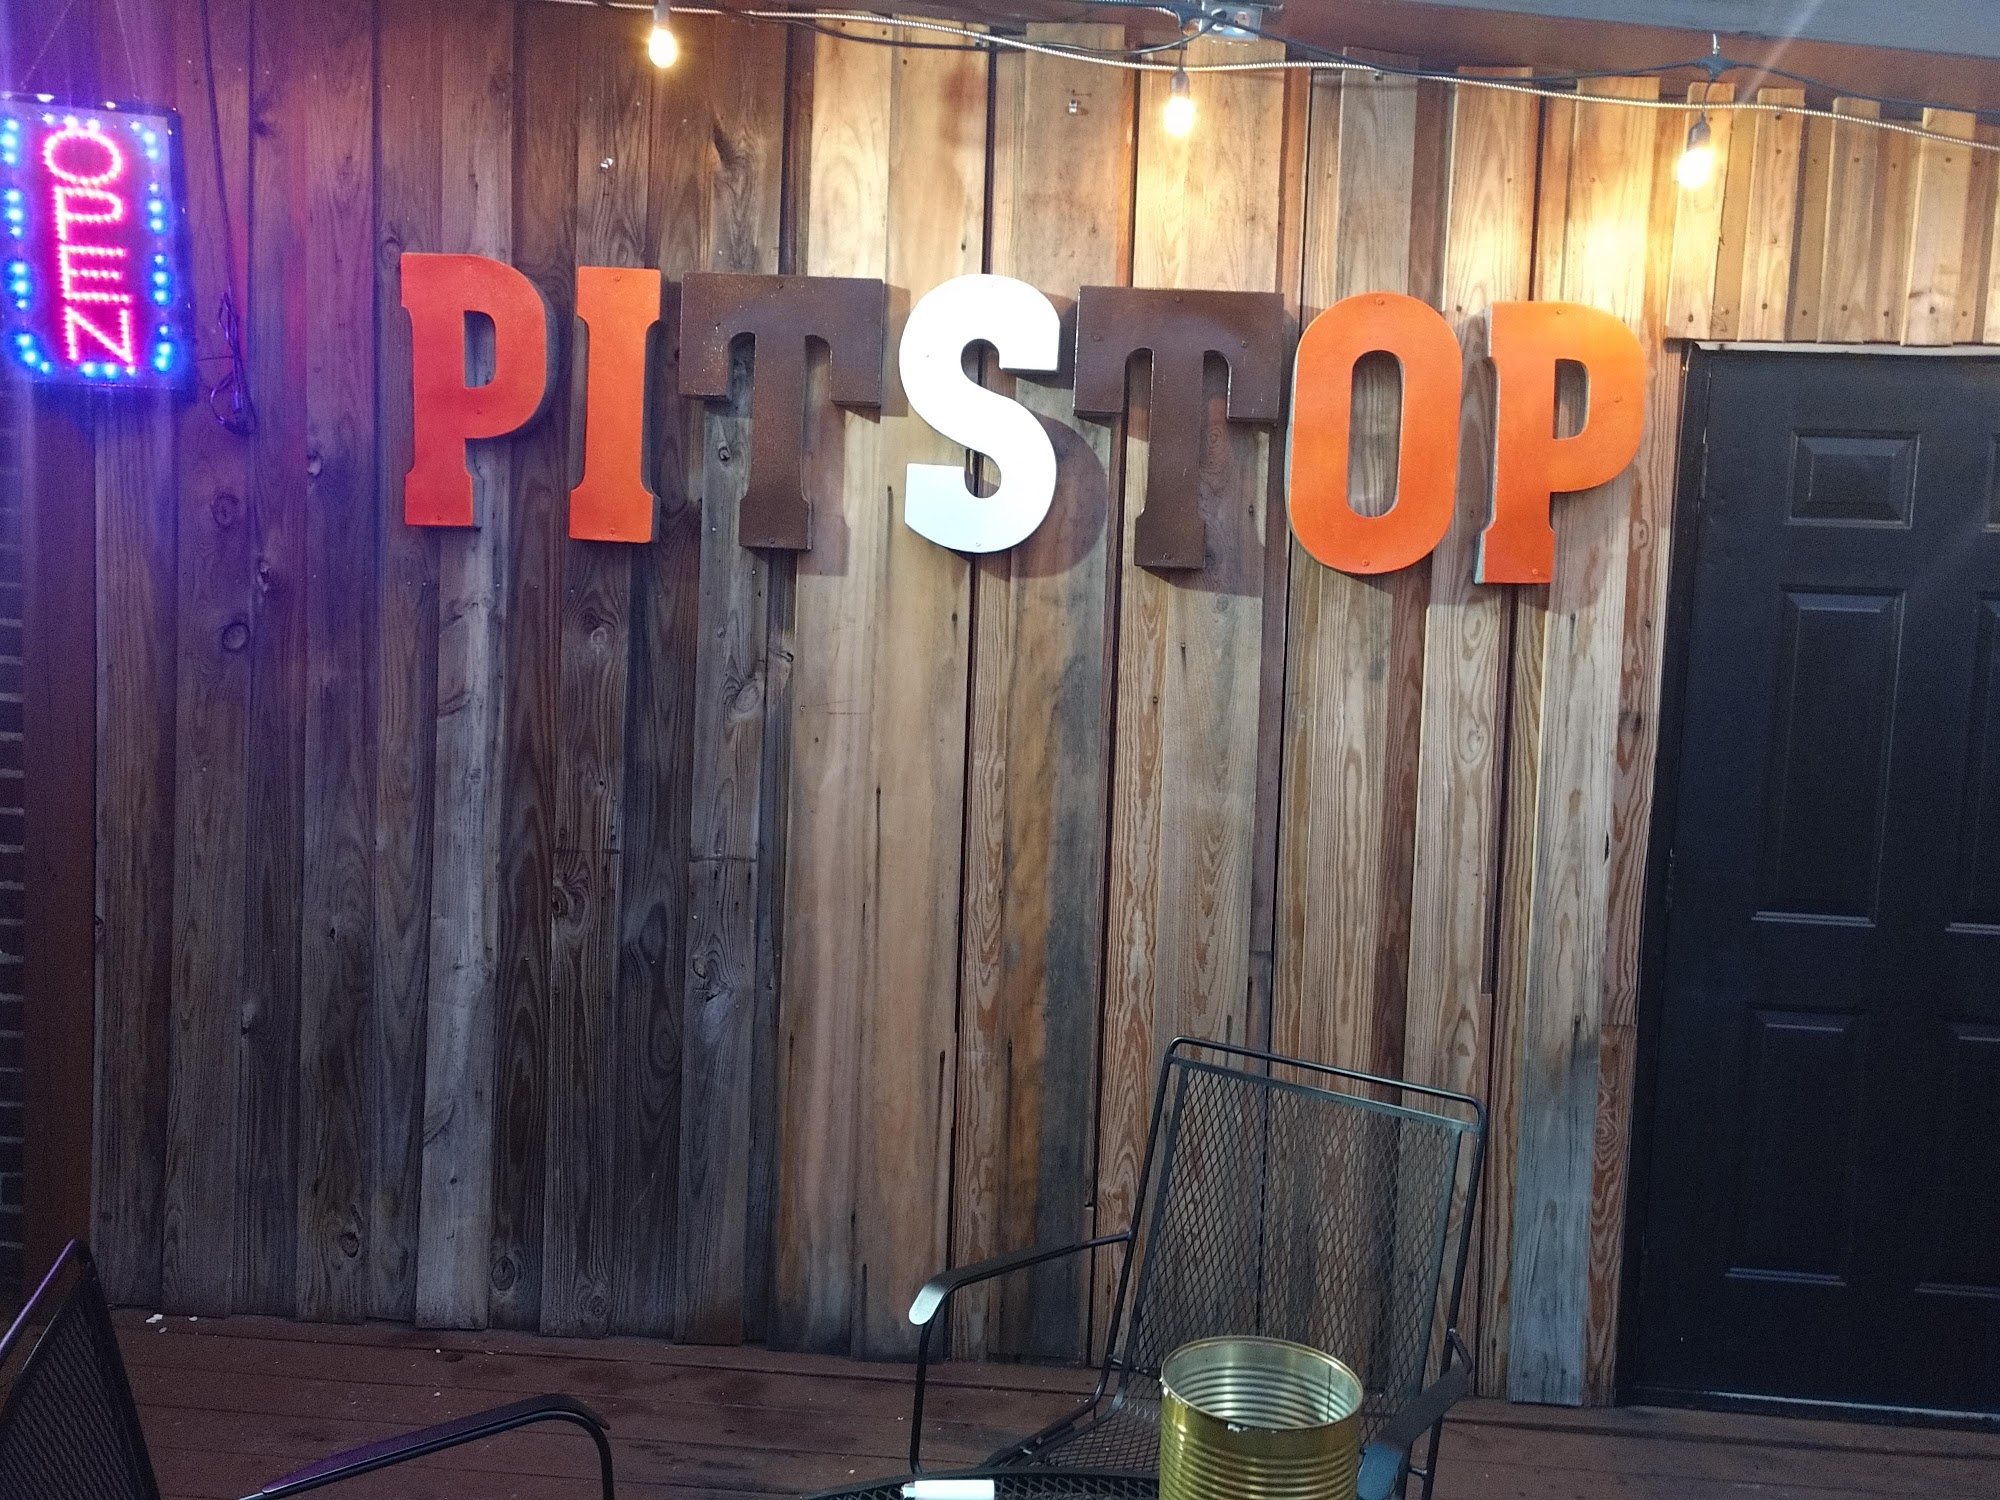 The Pit Stop Sports Bar of Sanford